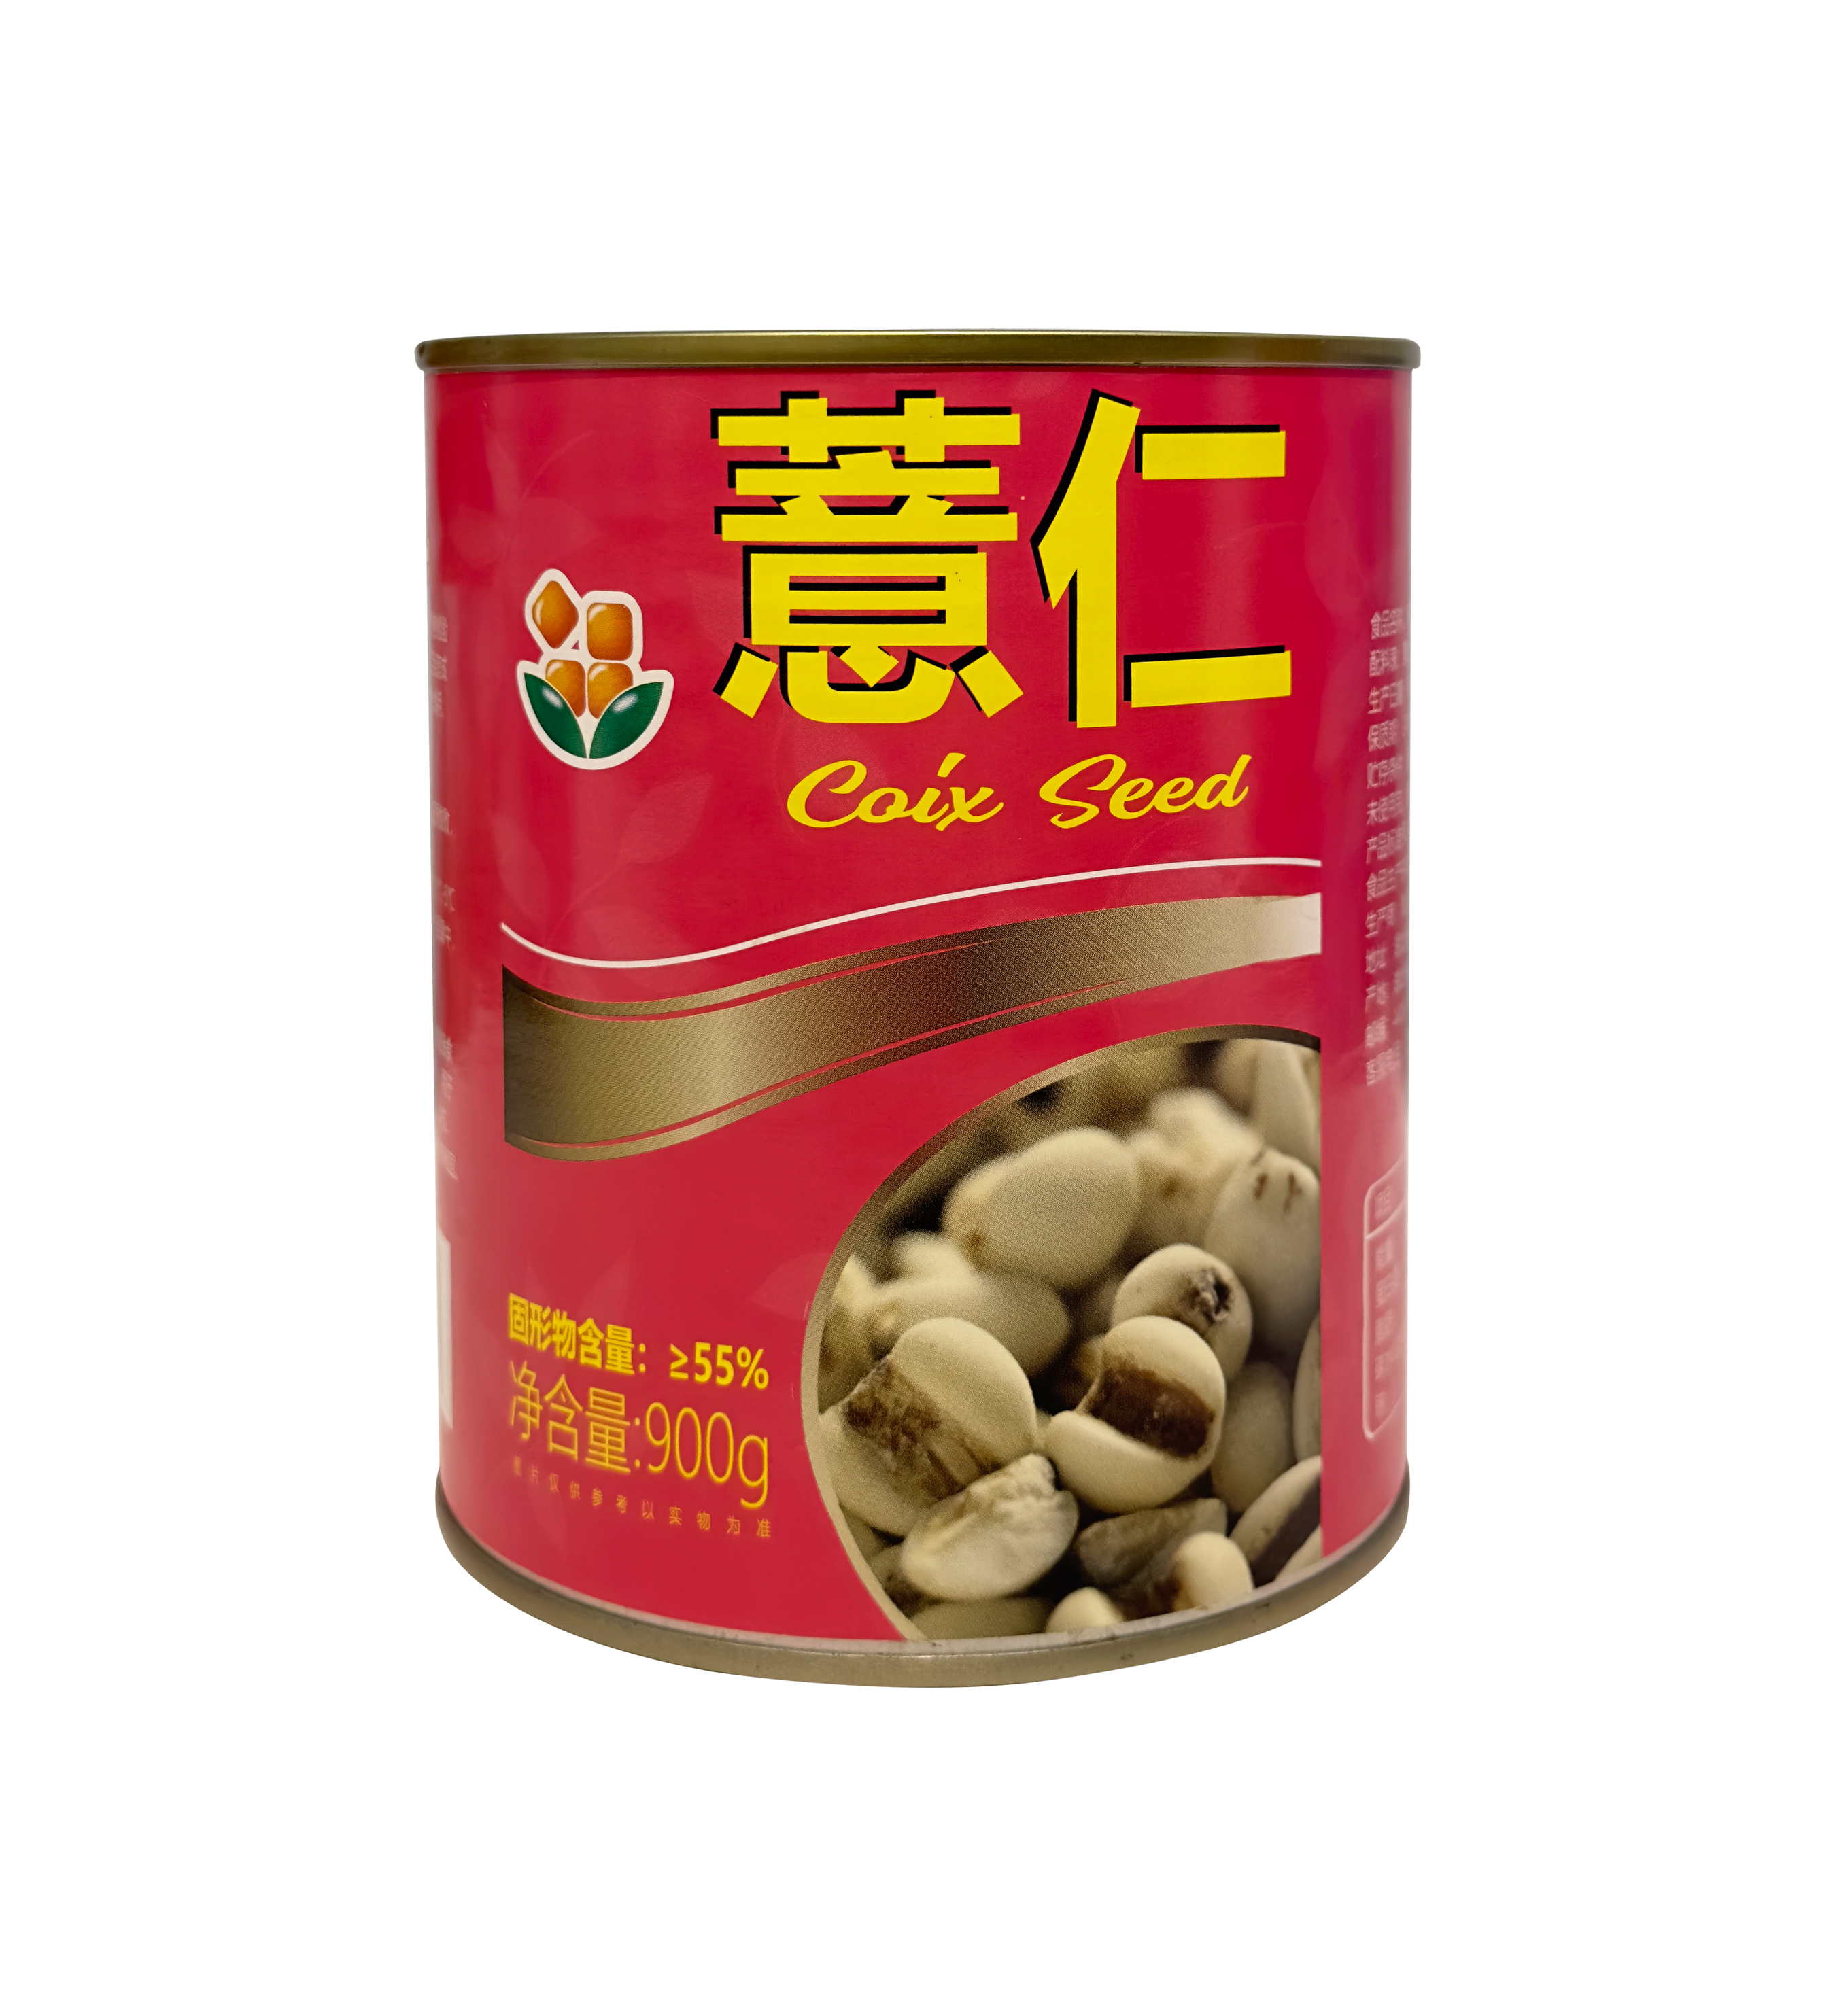 Canned coix seed